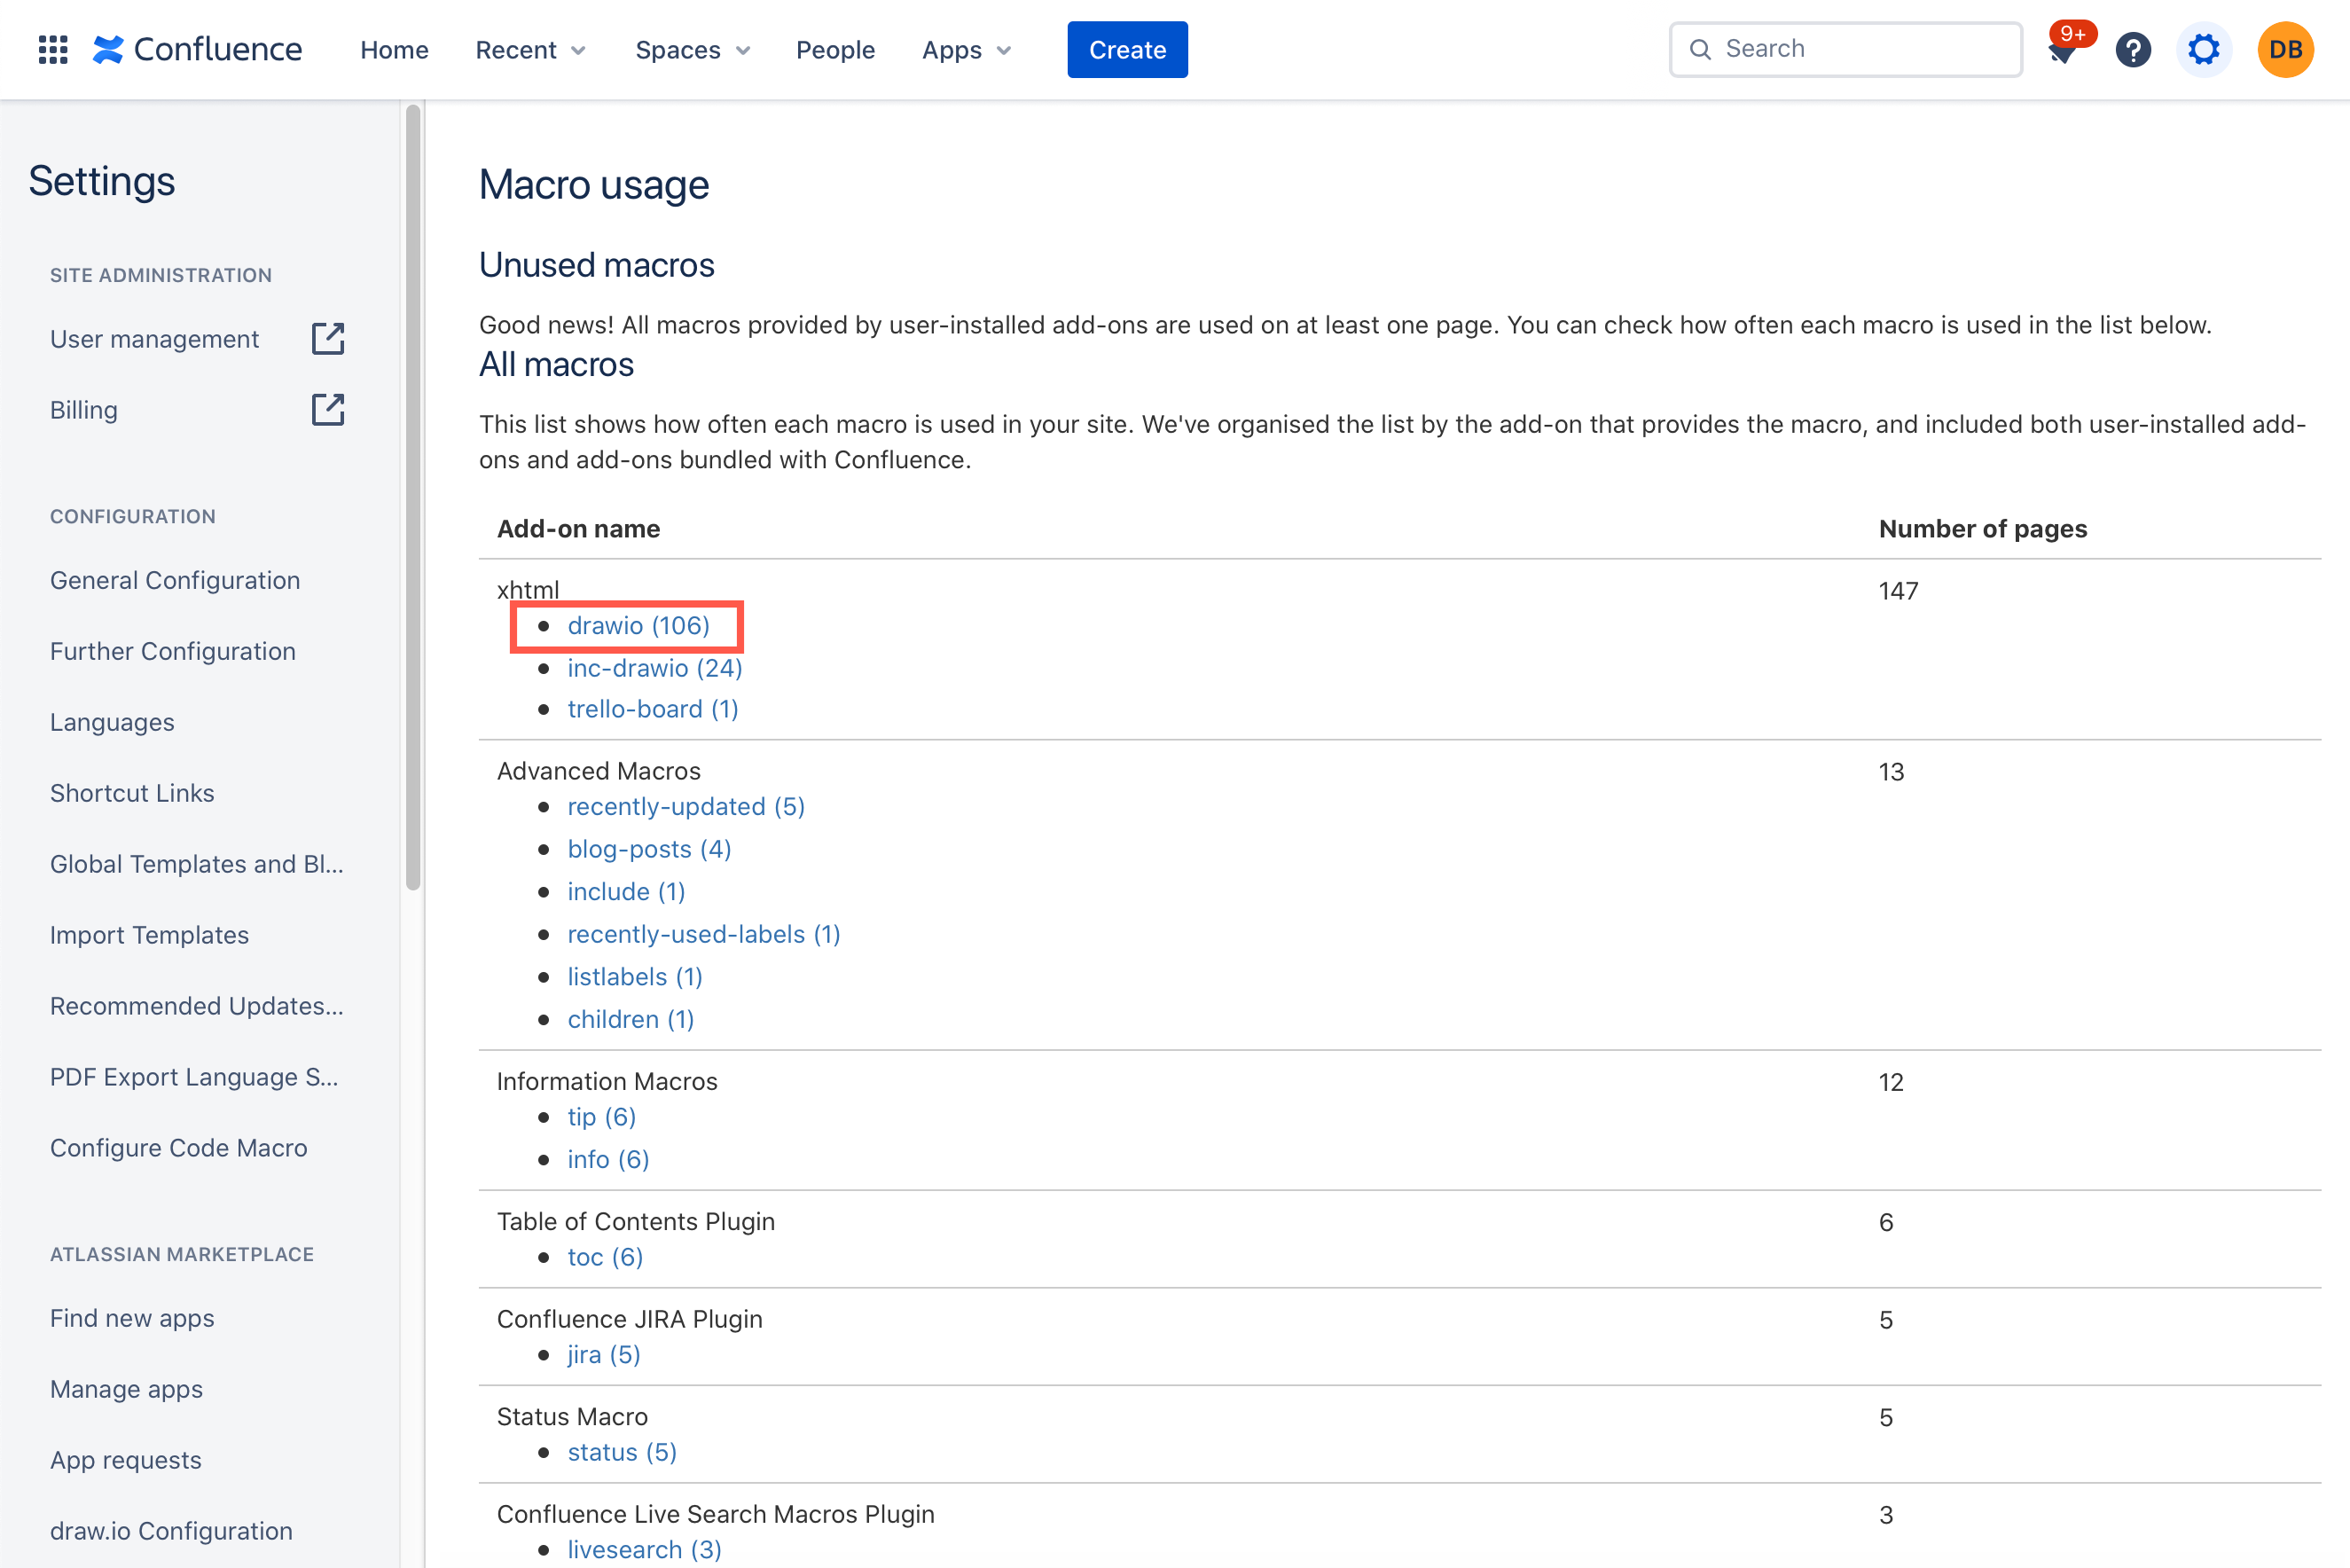 Macro usage in Confluence Cloud